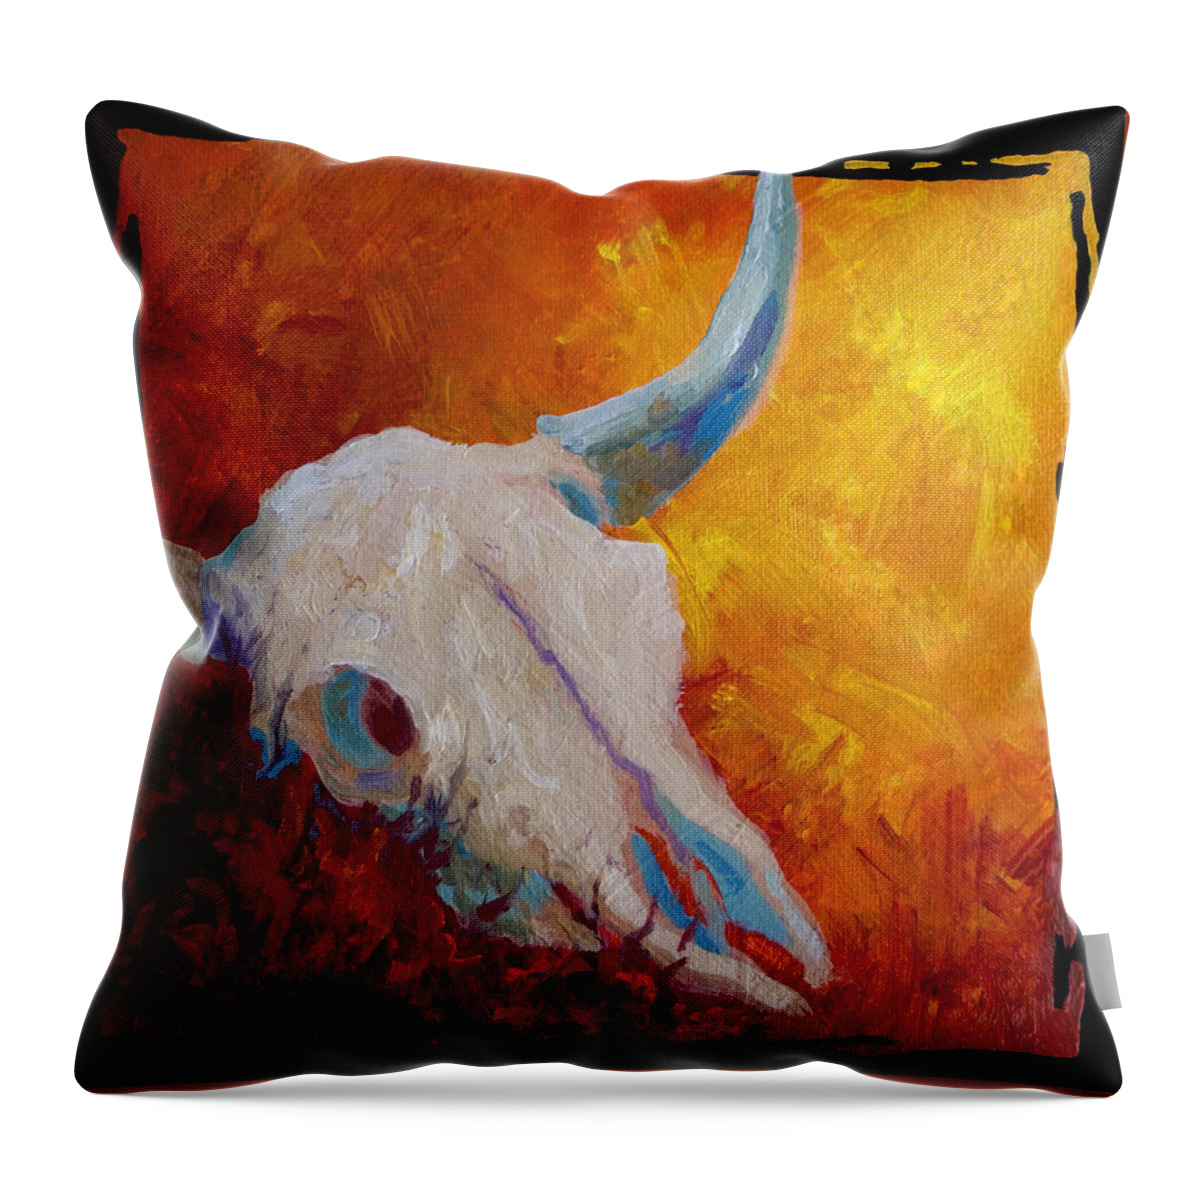 Longhorn Throw Pillow featuring the painting Texas Longhorn Skull by Marion Rose